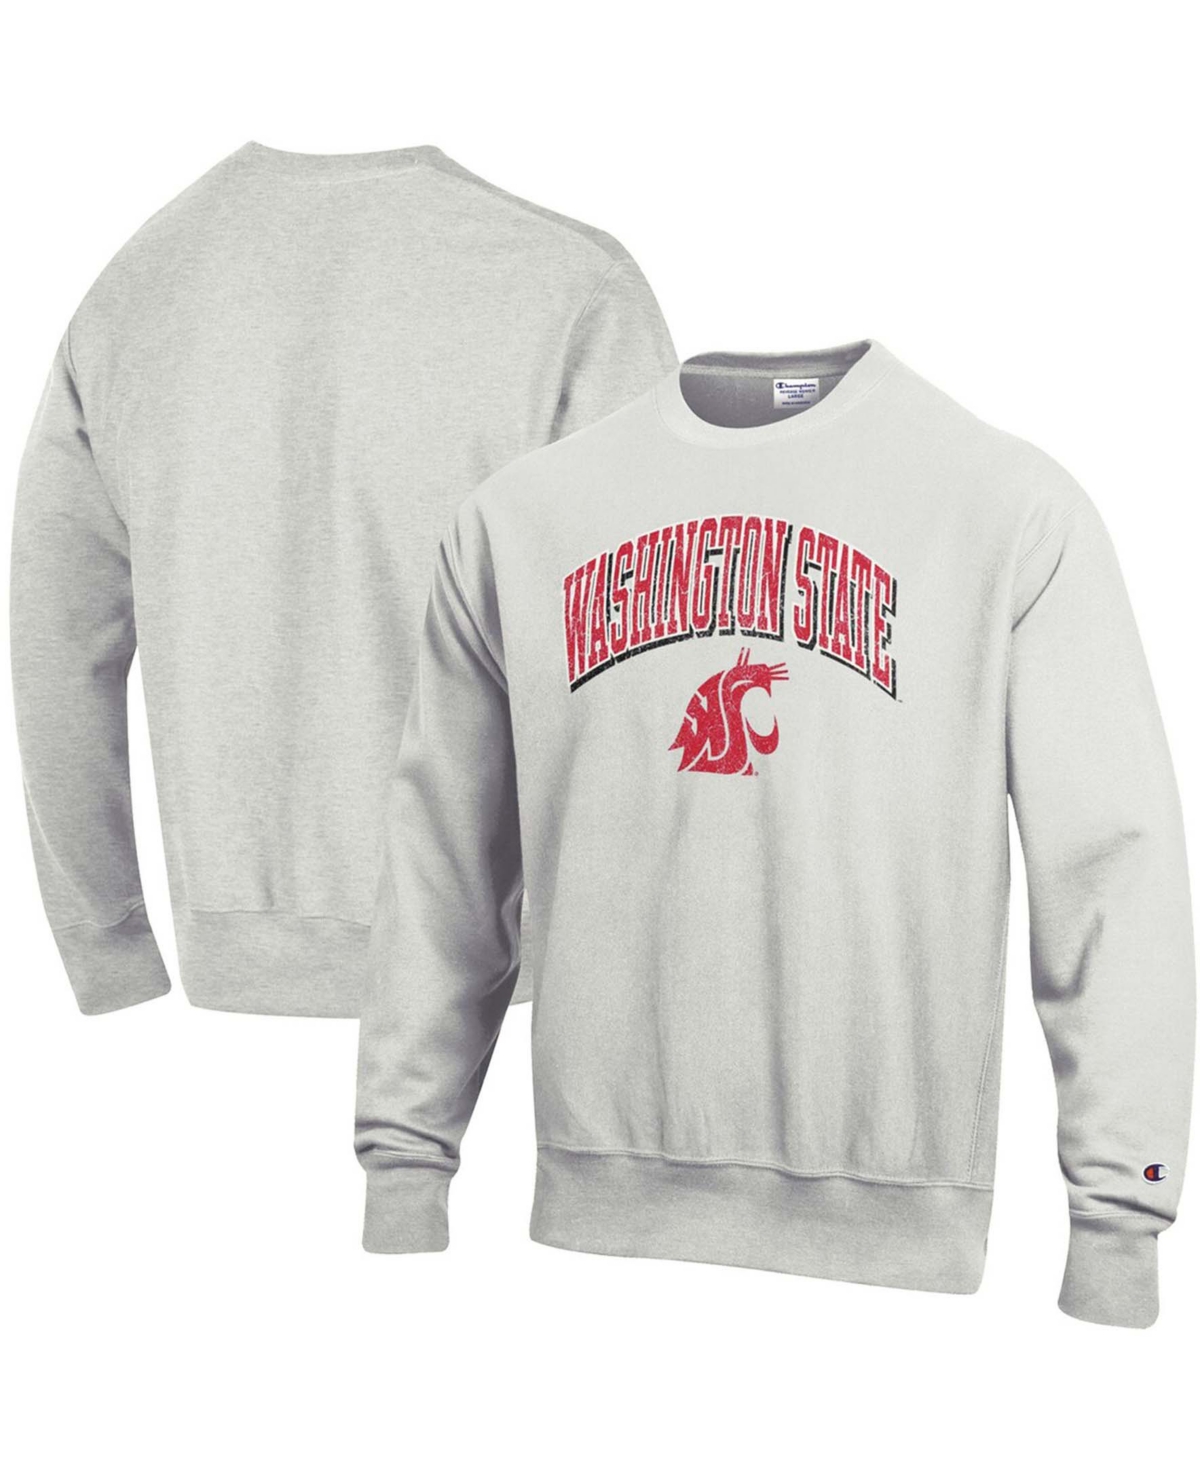 Champion Men's Heathered Gray Washington State Cougars Arch Over Logo Reverse Weave Pullover Sweatshirt